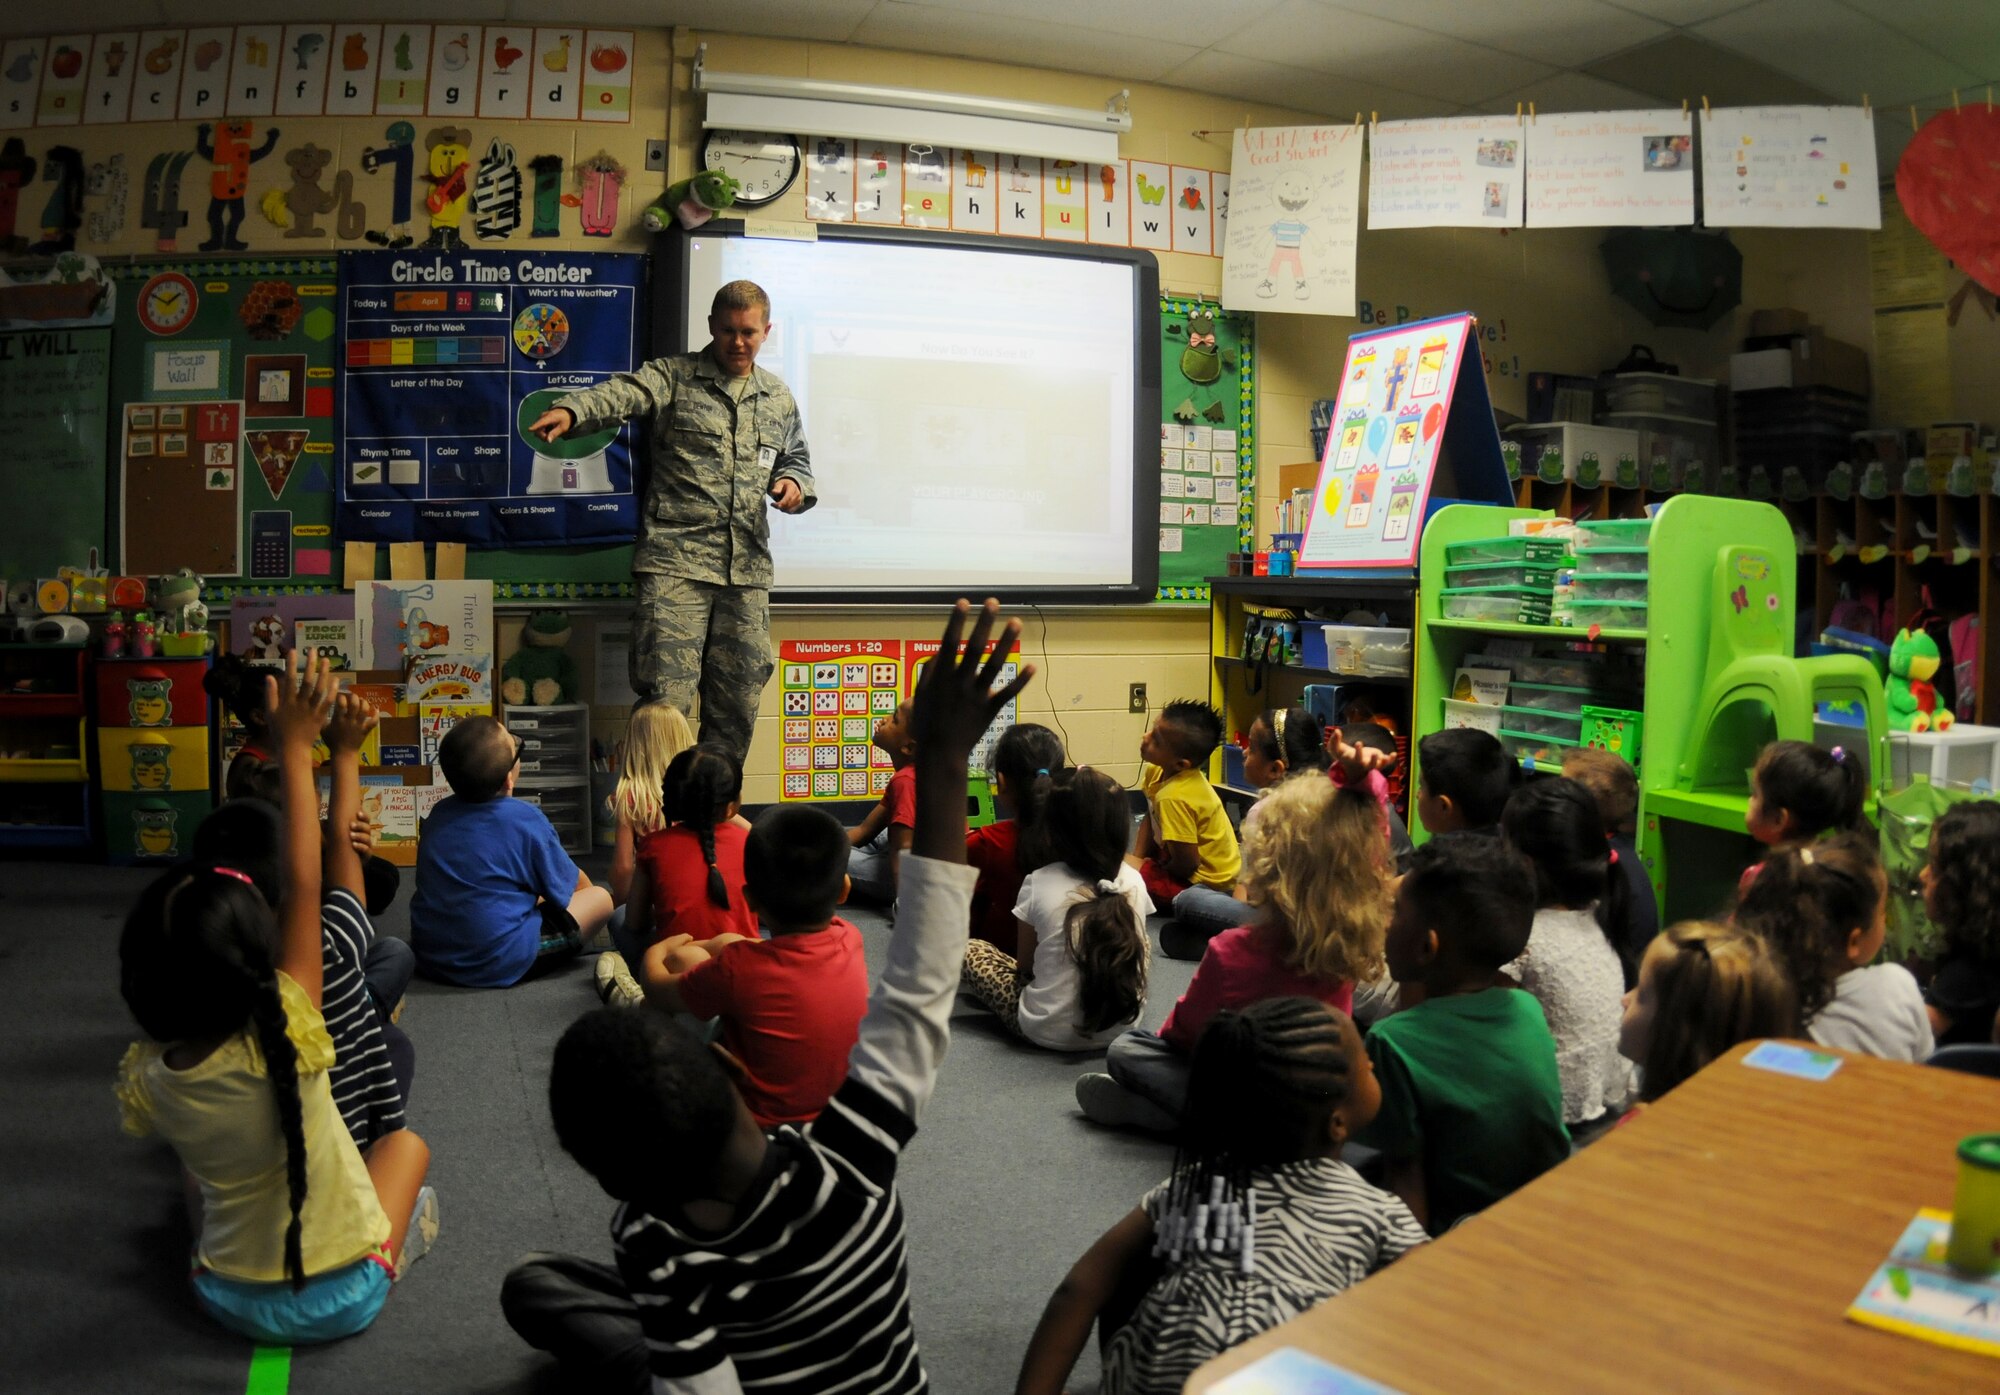 Master Sgt. Paul Denton, 188th Wing, answers questions from students at Sutton Elementary, Fort Smith, Ark., during Career Day Oct. 9, 2015. The 188th Wing has partnered with Sutton Elementary to provide a positive influence to children within the community. (U.S. Air National Guard photo by Senior Airman Cody Martin/Released)